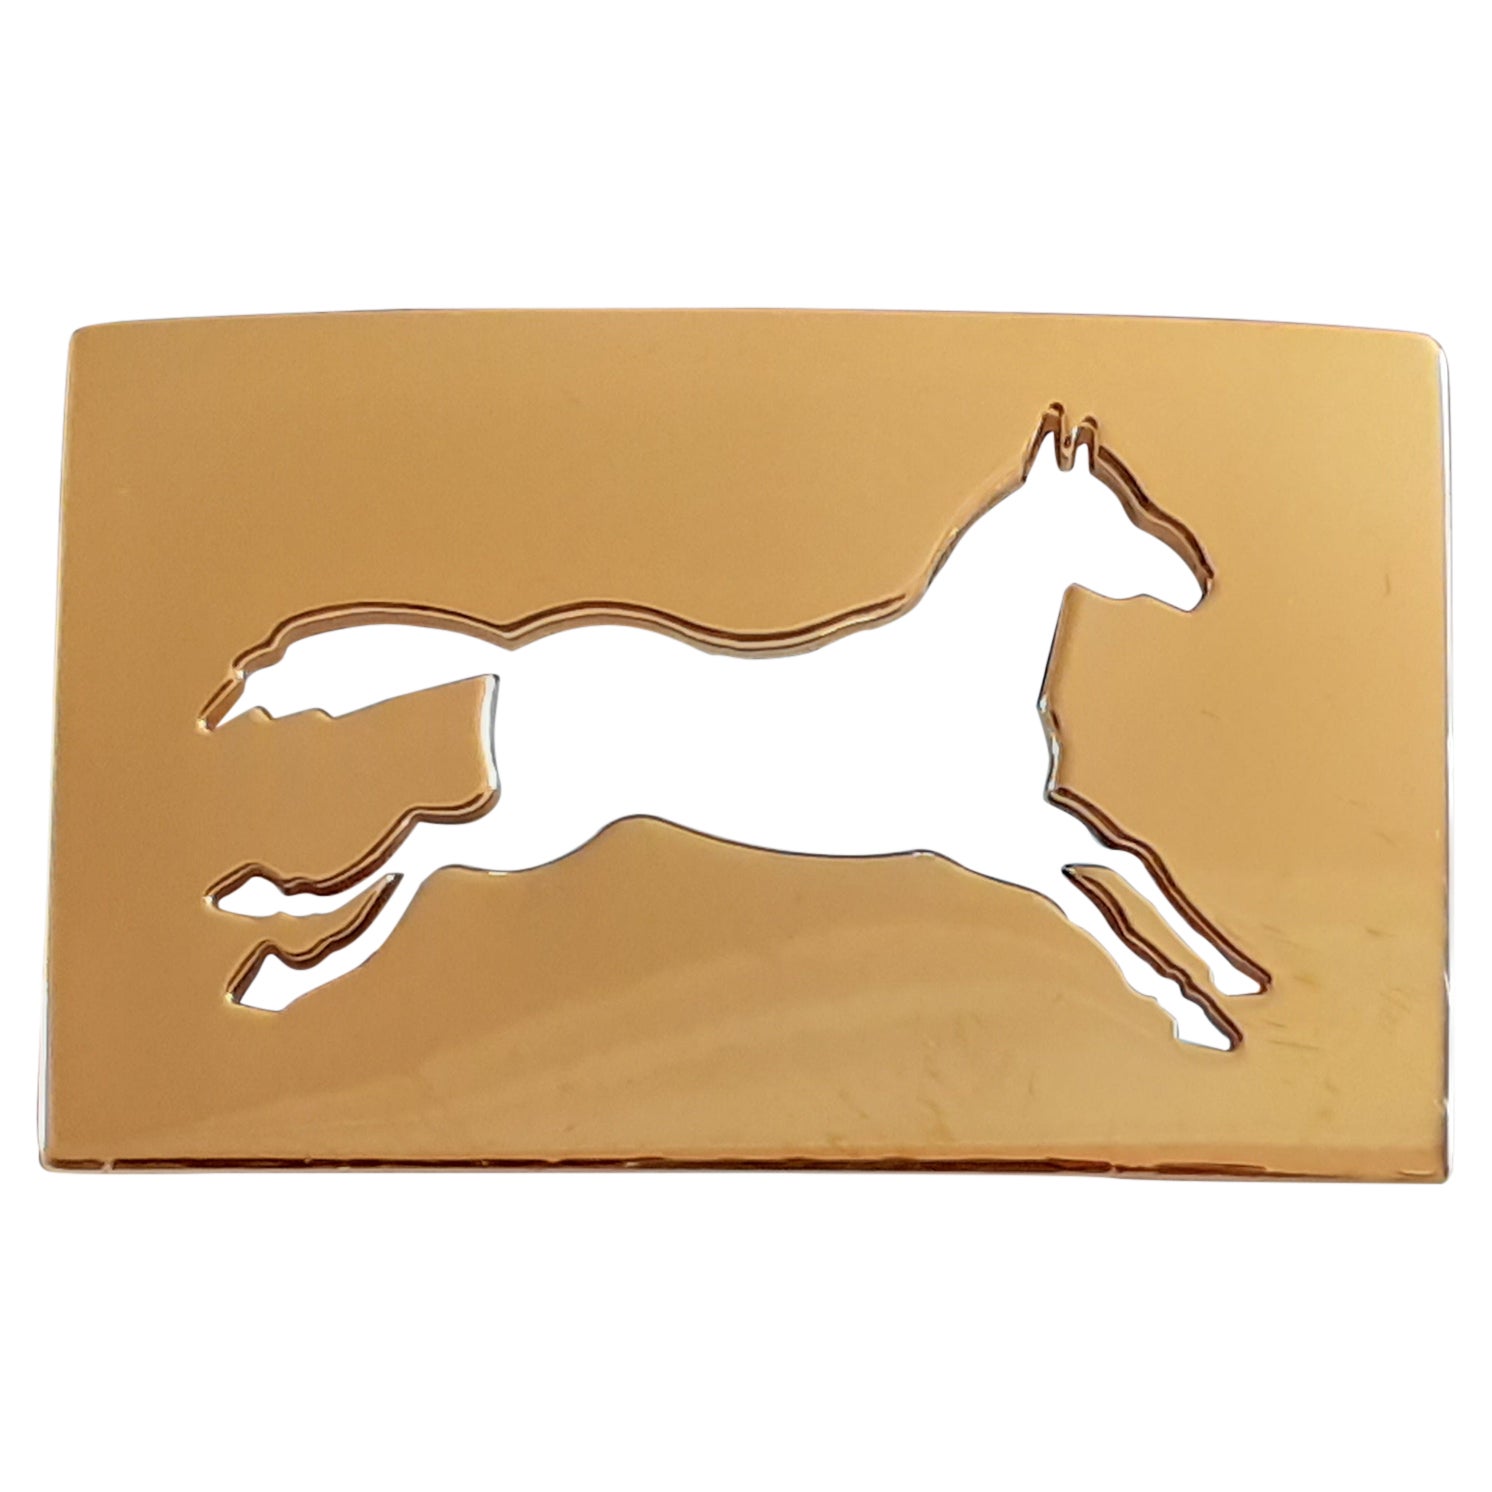 Exceptional Hermès Belt Buckle Horse Shaped in Gold for 32 mm Belt Texas